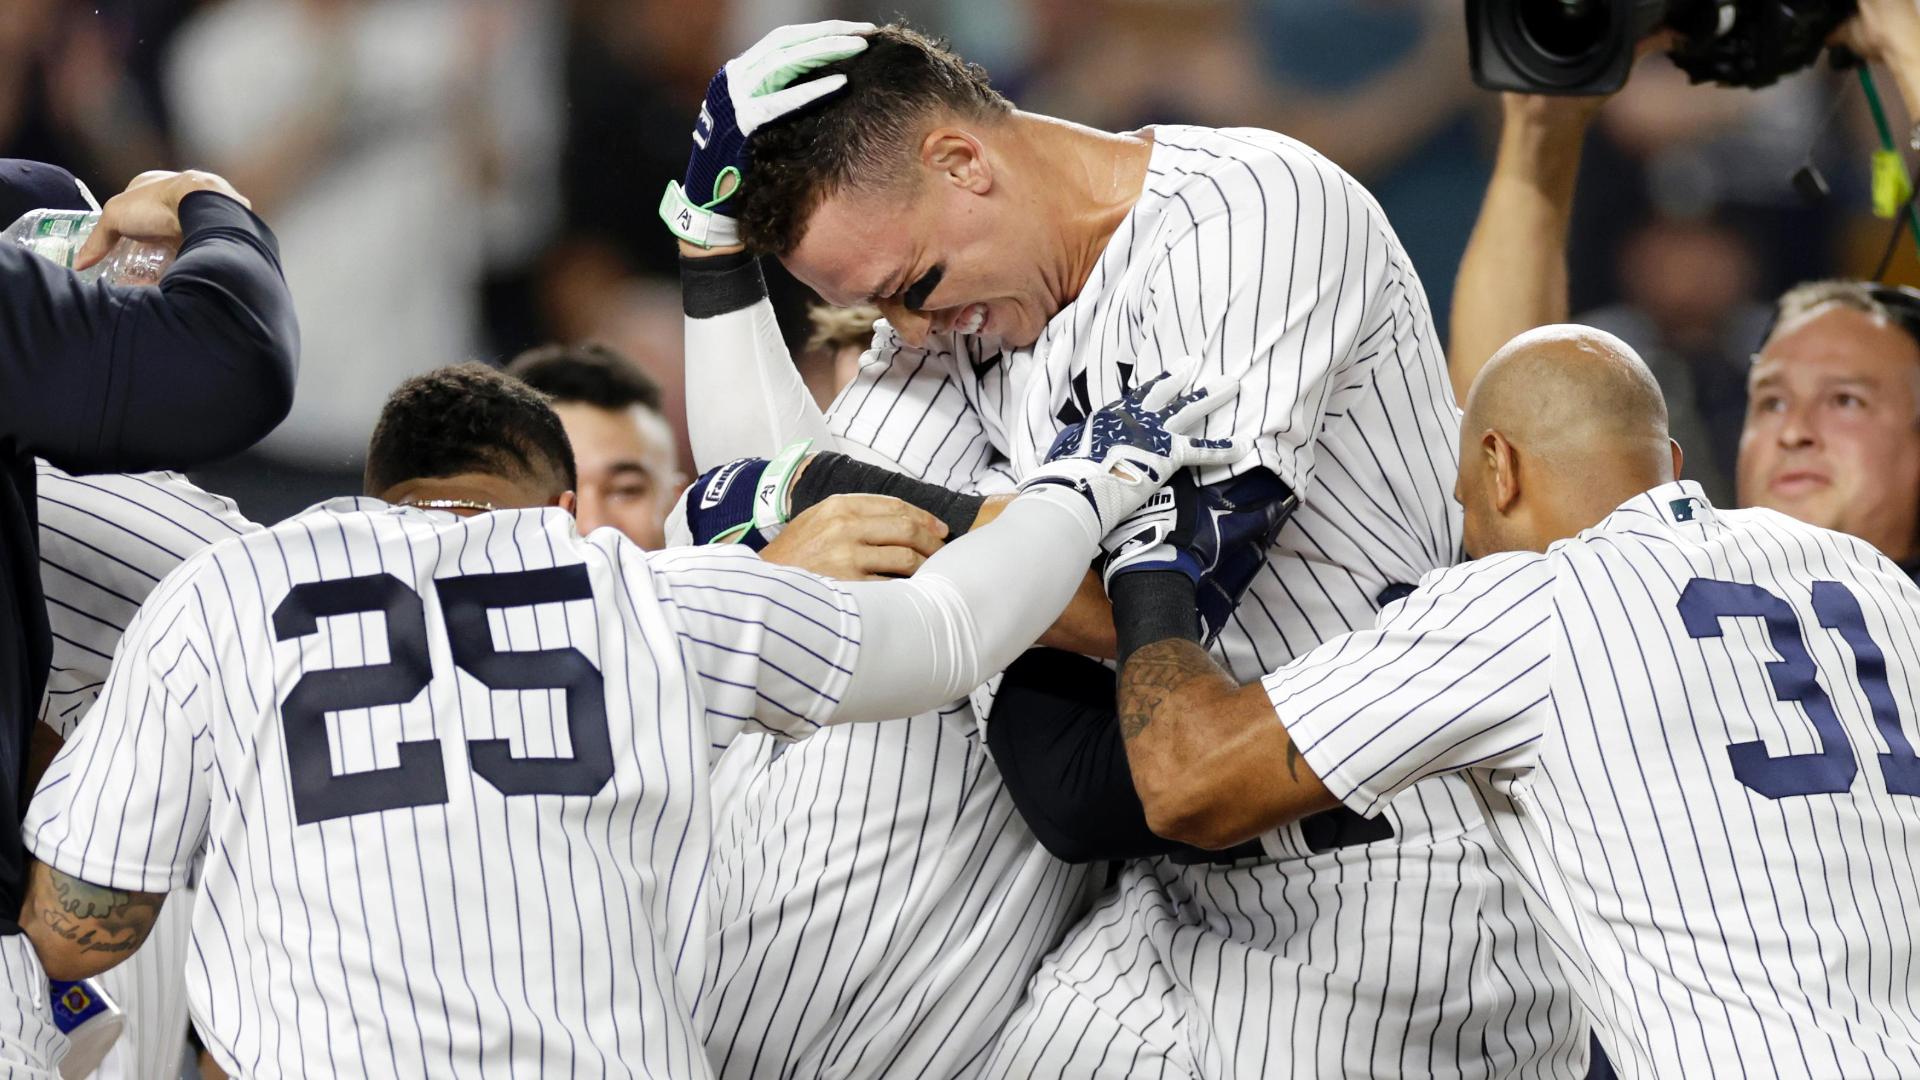 Judge's 3rd walk-off HR of year lifts Yanks over Royals 1-0 - ABC7 New York